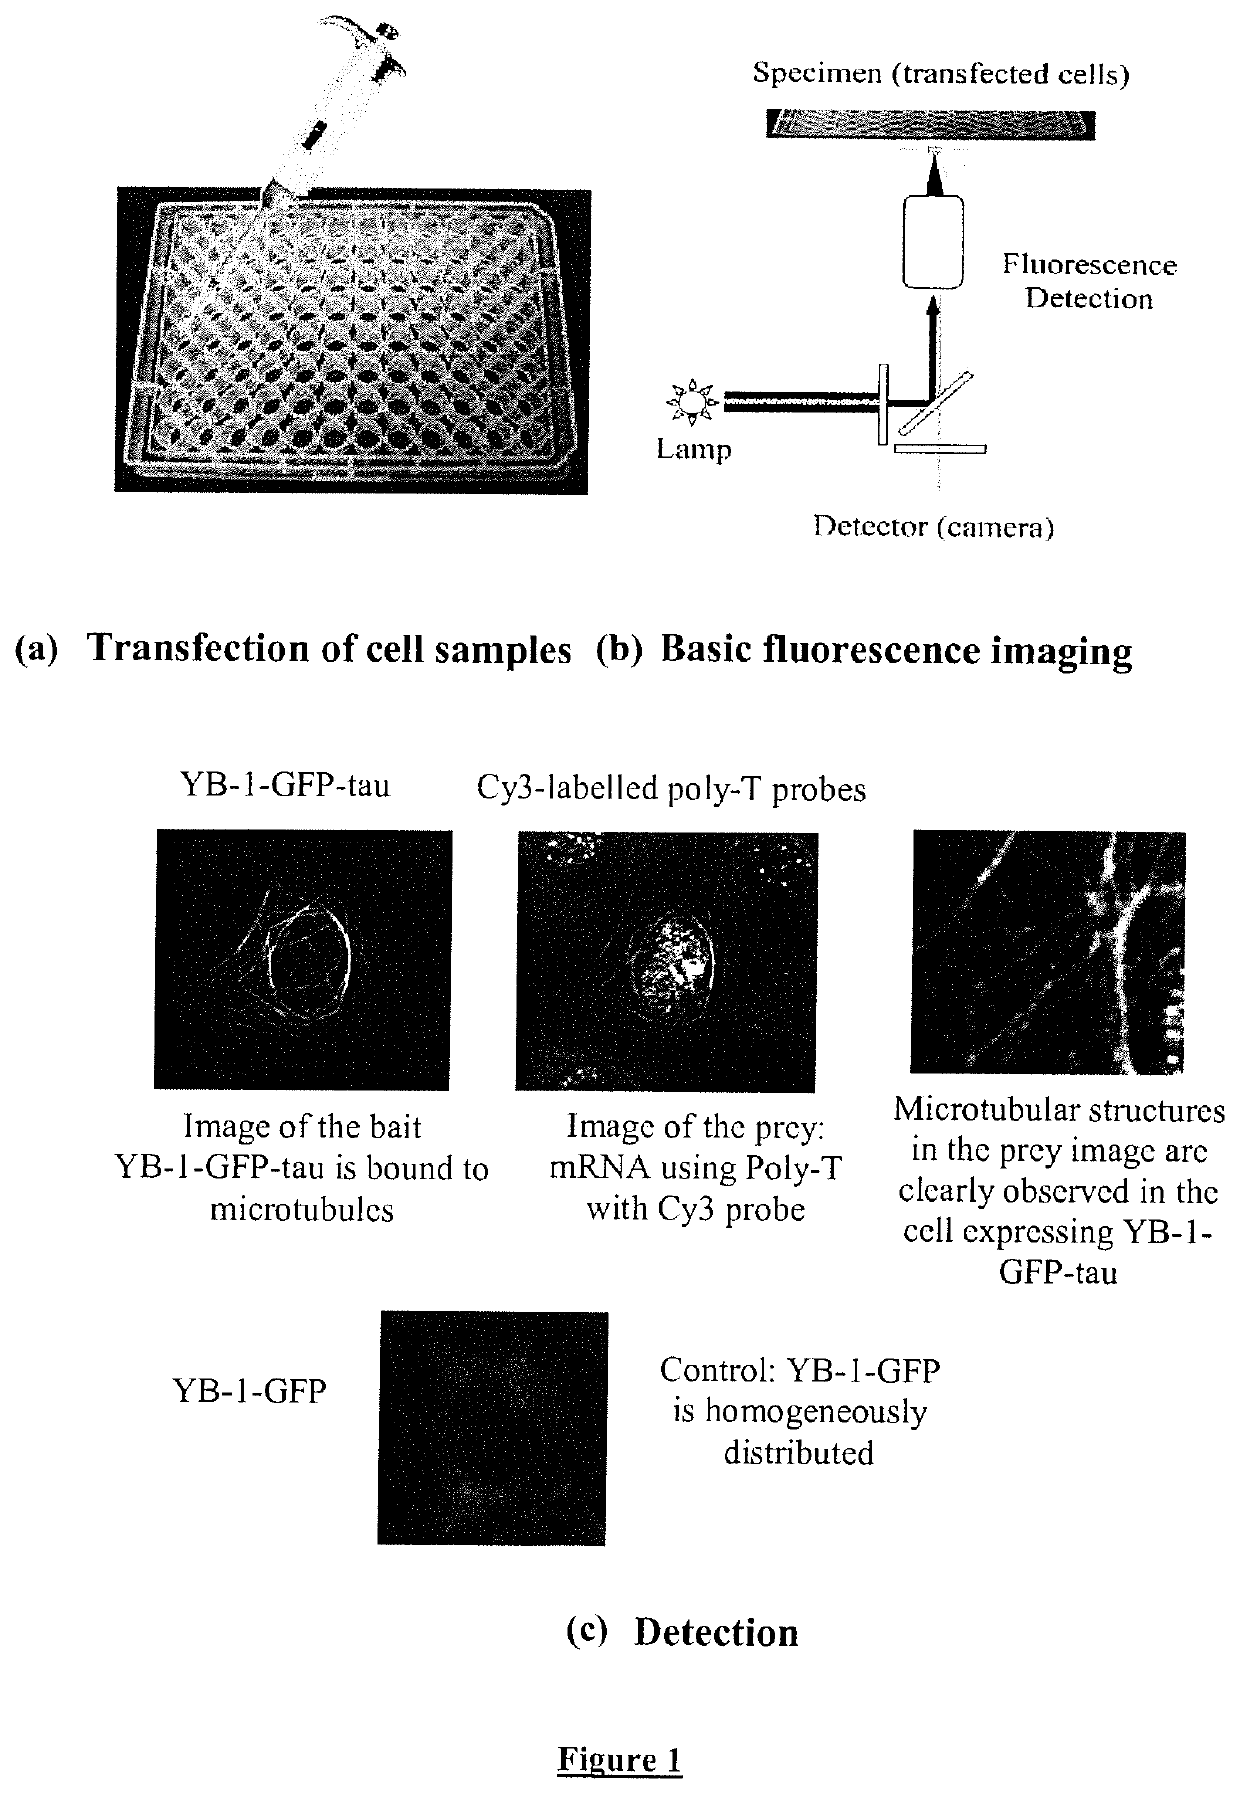 Methods and tools for detecting interactions in eukaryotic cells using microtubule structures and dynamics